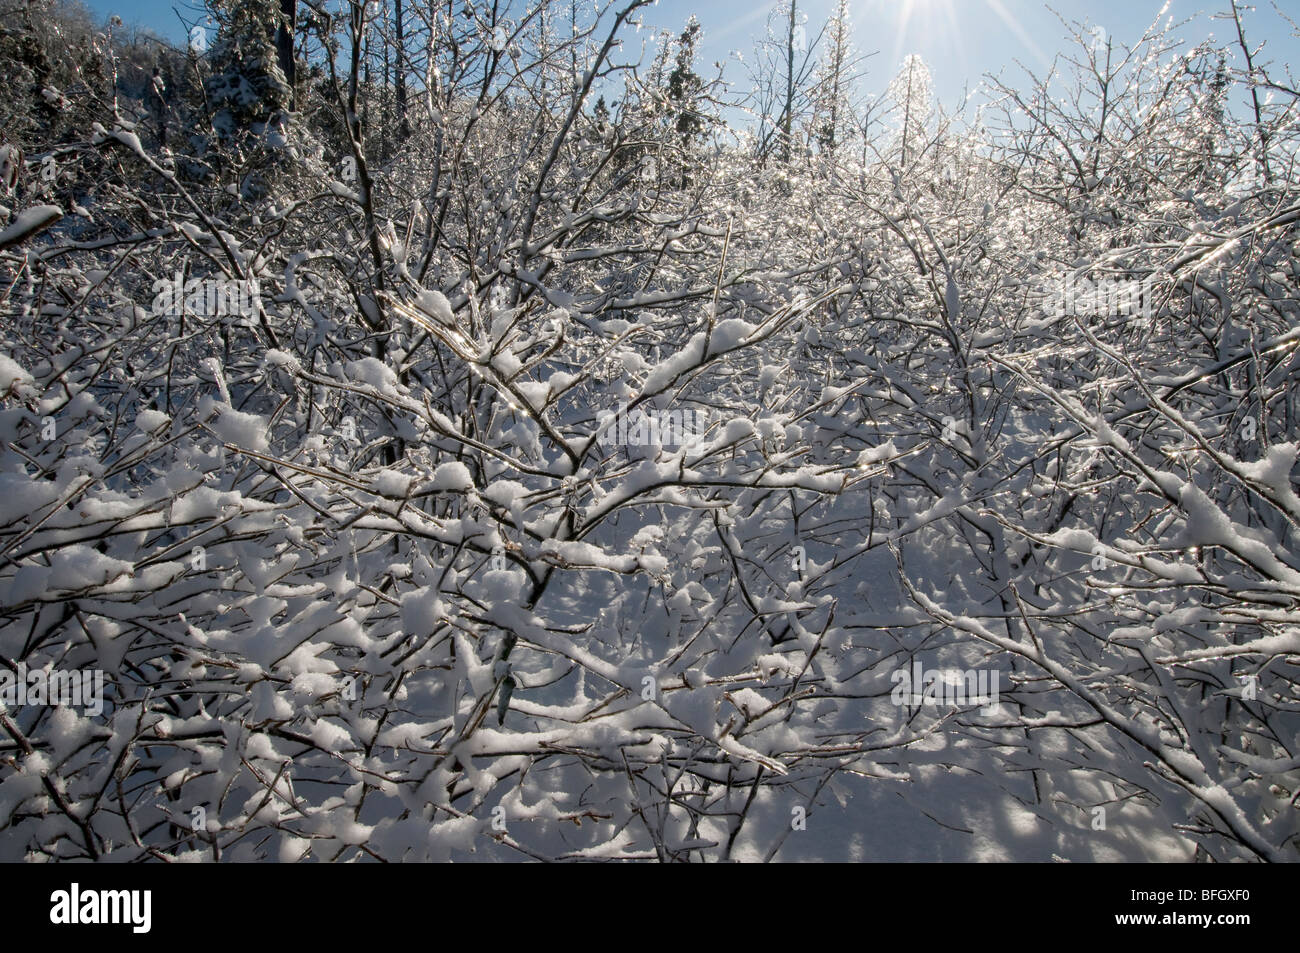 Sun shining on snow and ice-covered branches, Ontario, Canada Stock Photo